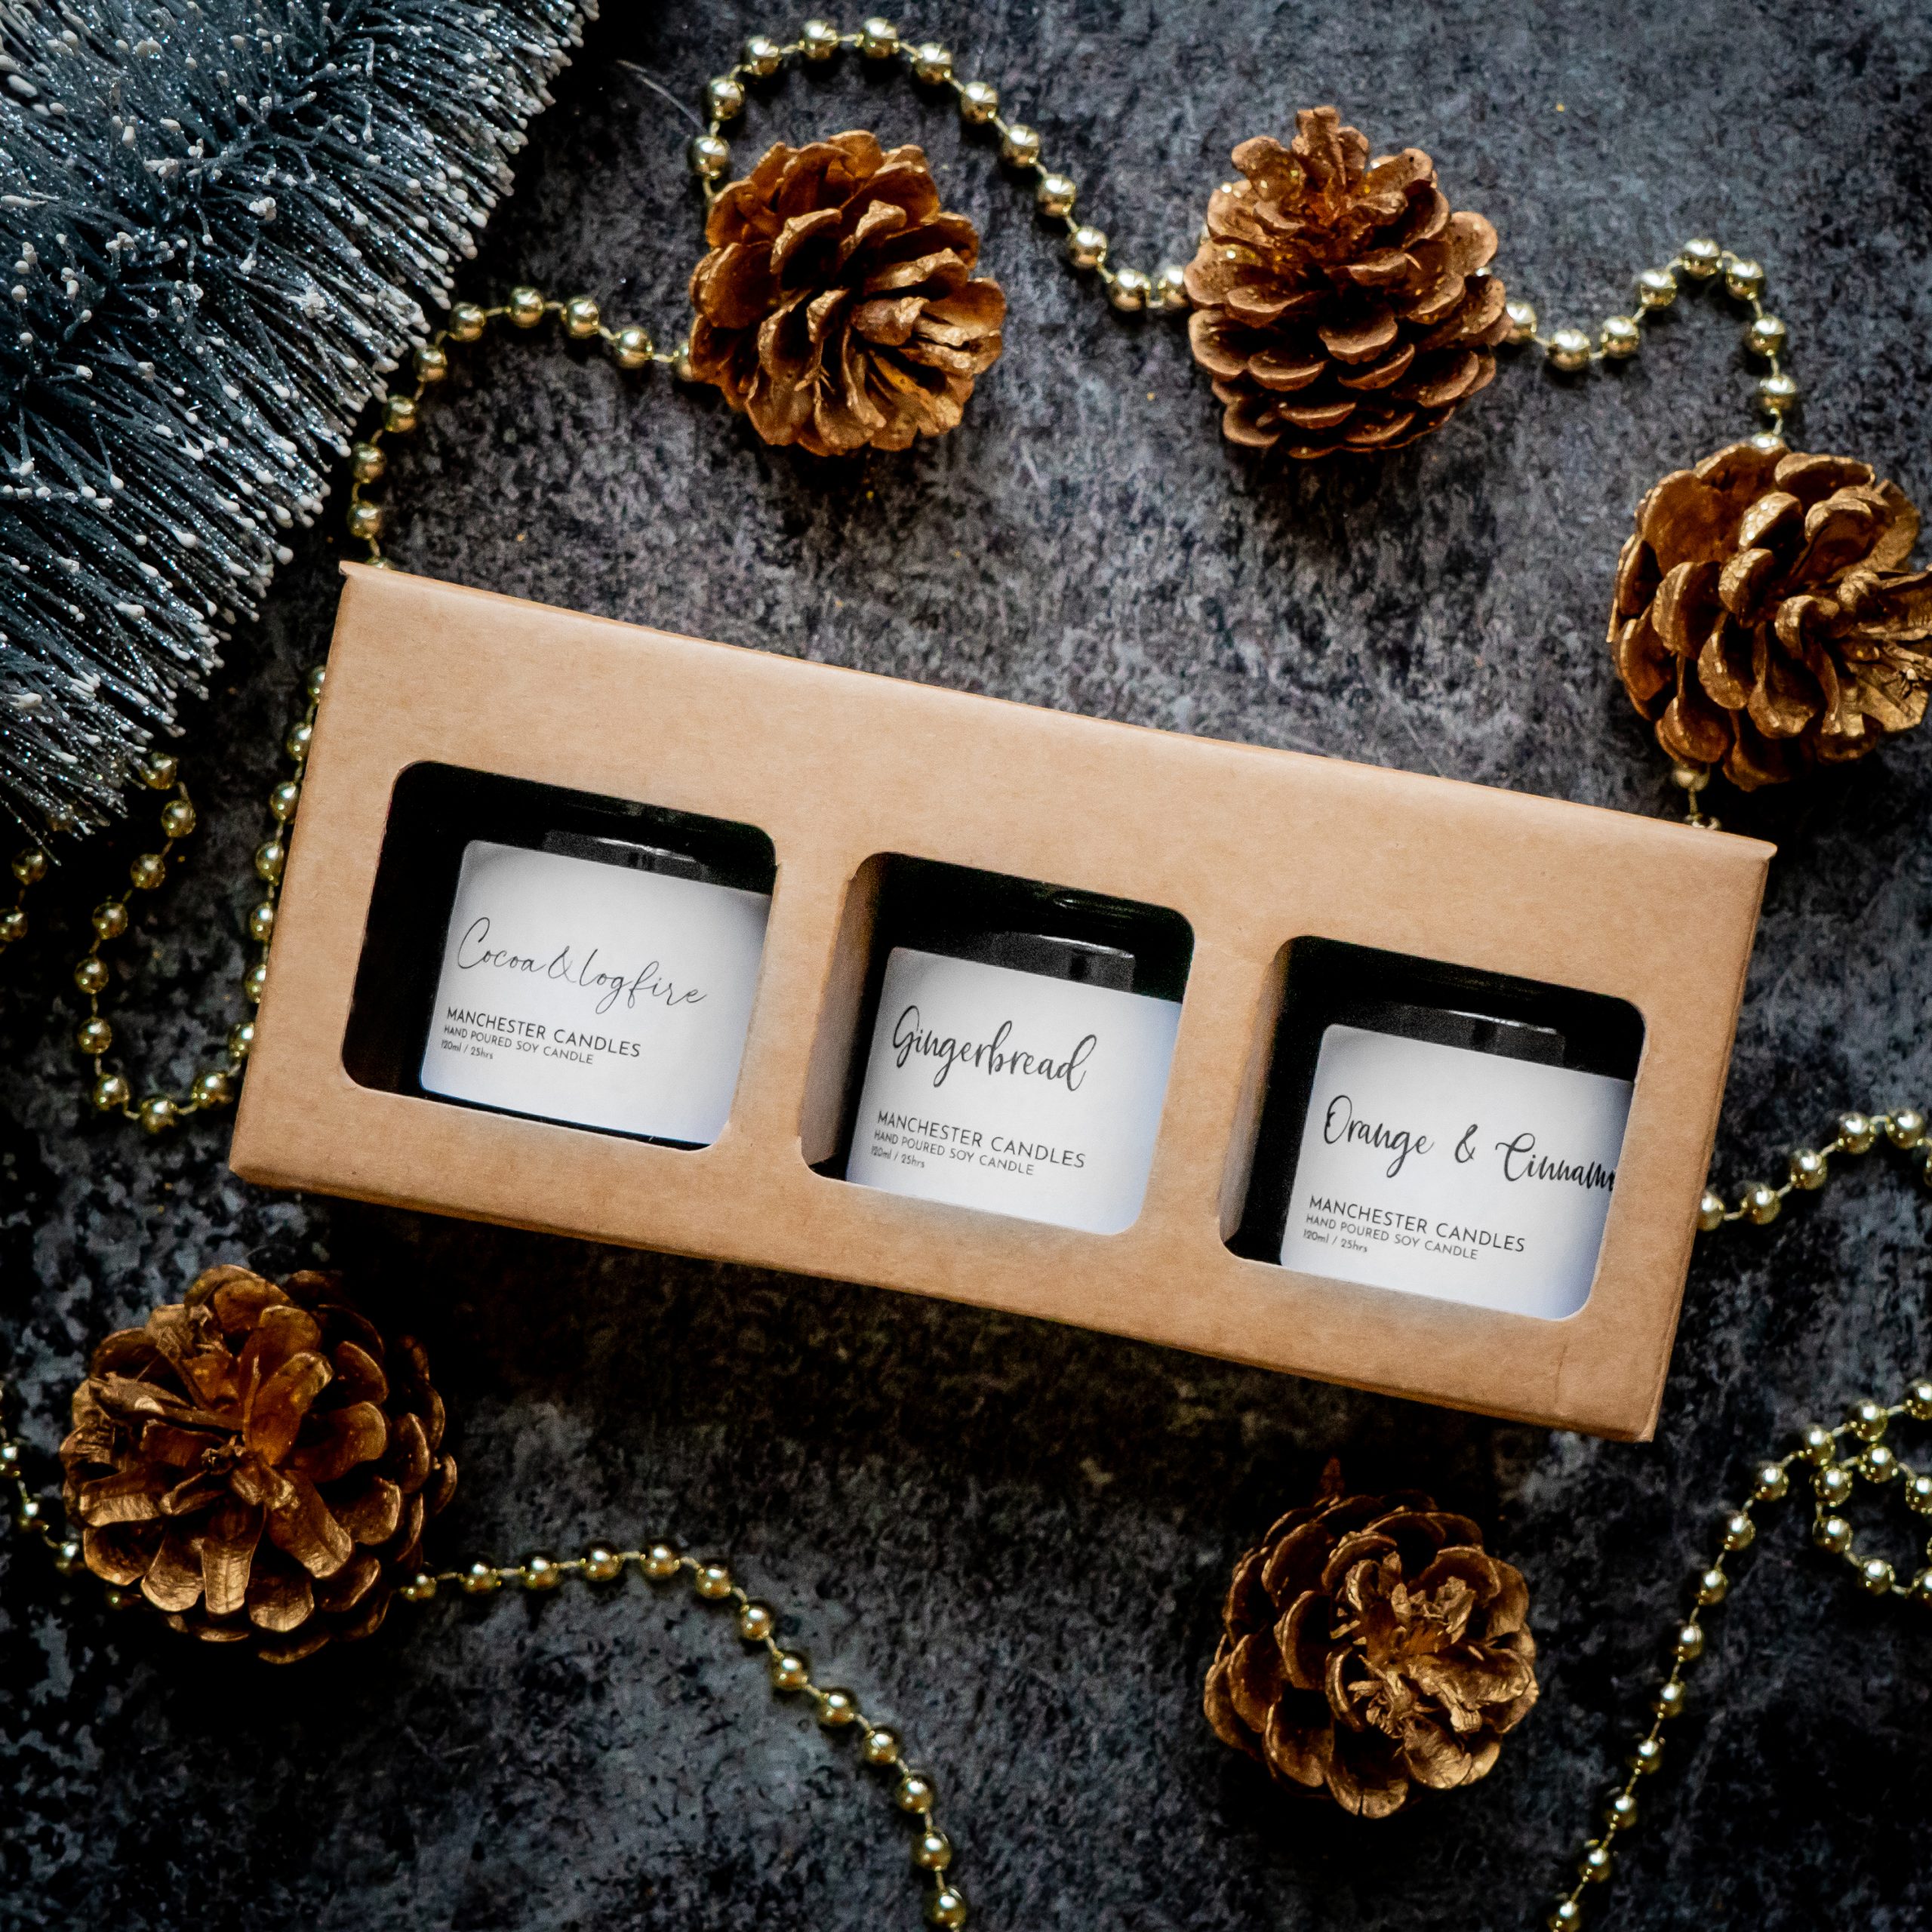 Candle Trio Gift Box. Three Boxed Festive Candles- Manchester Candles